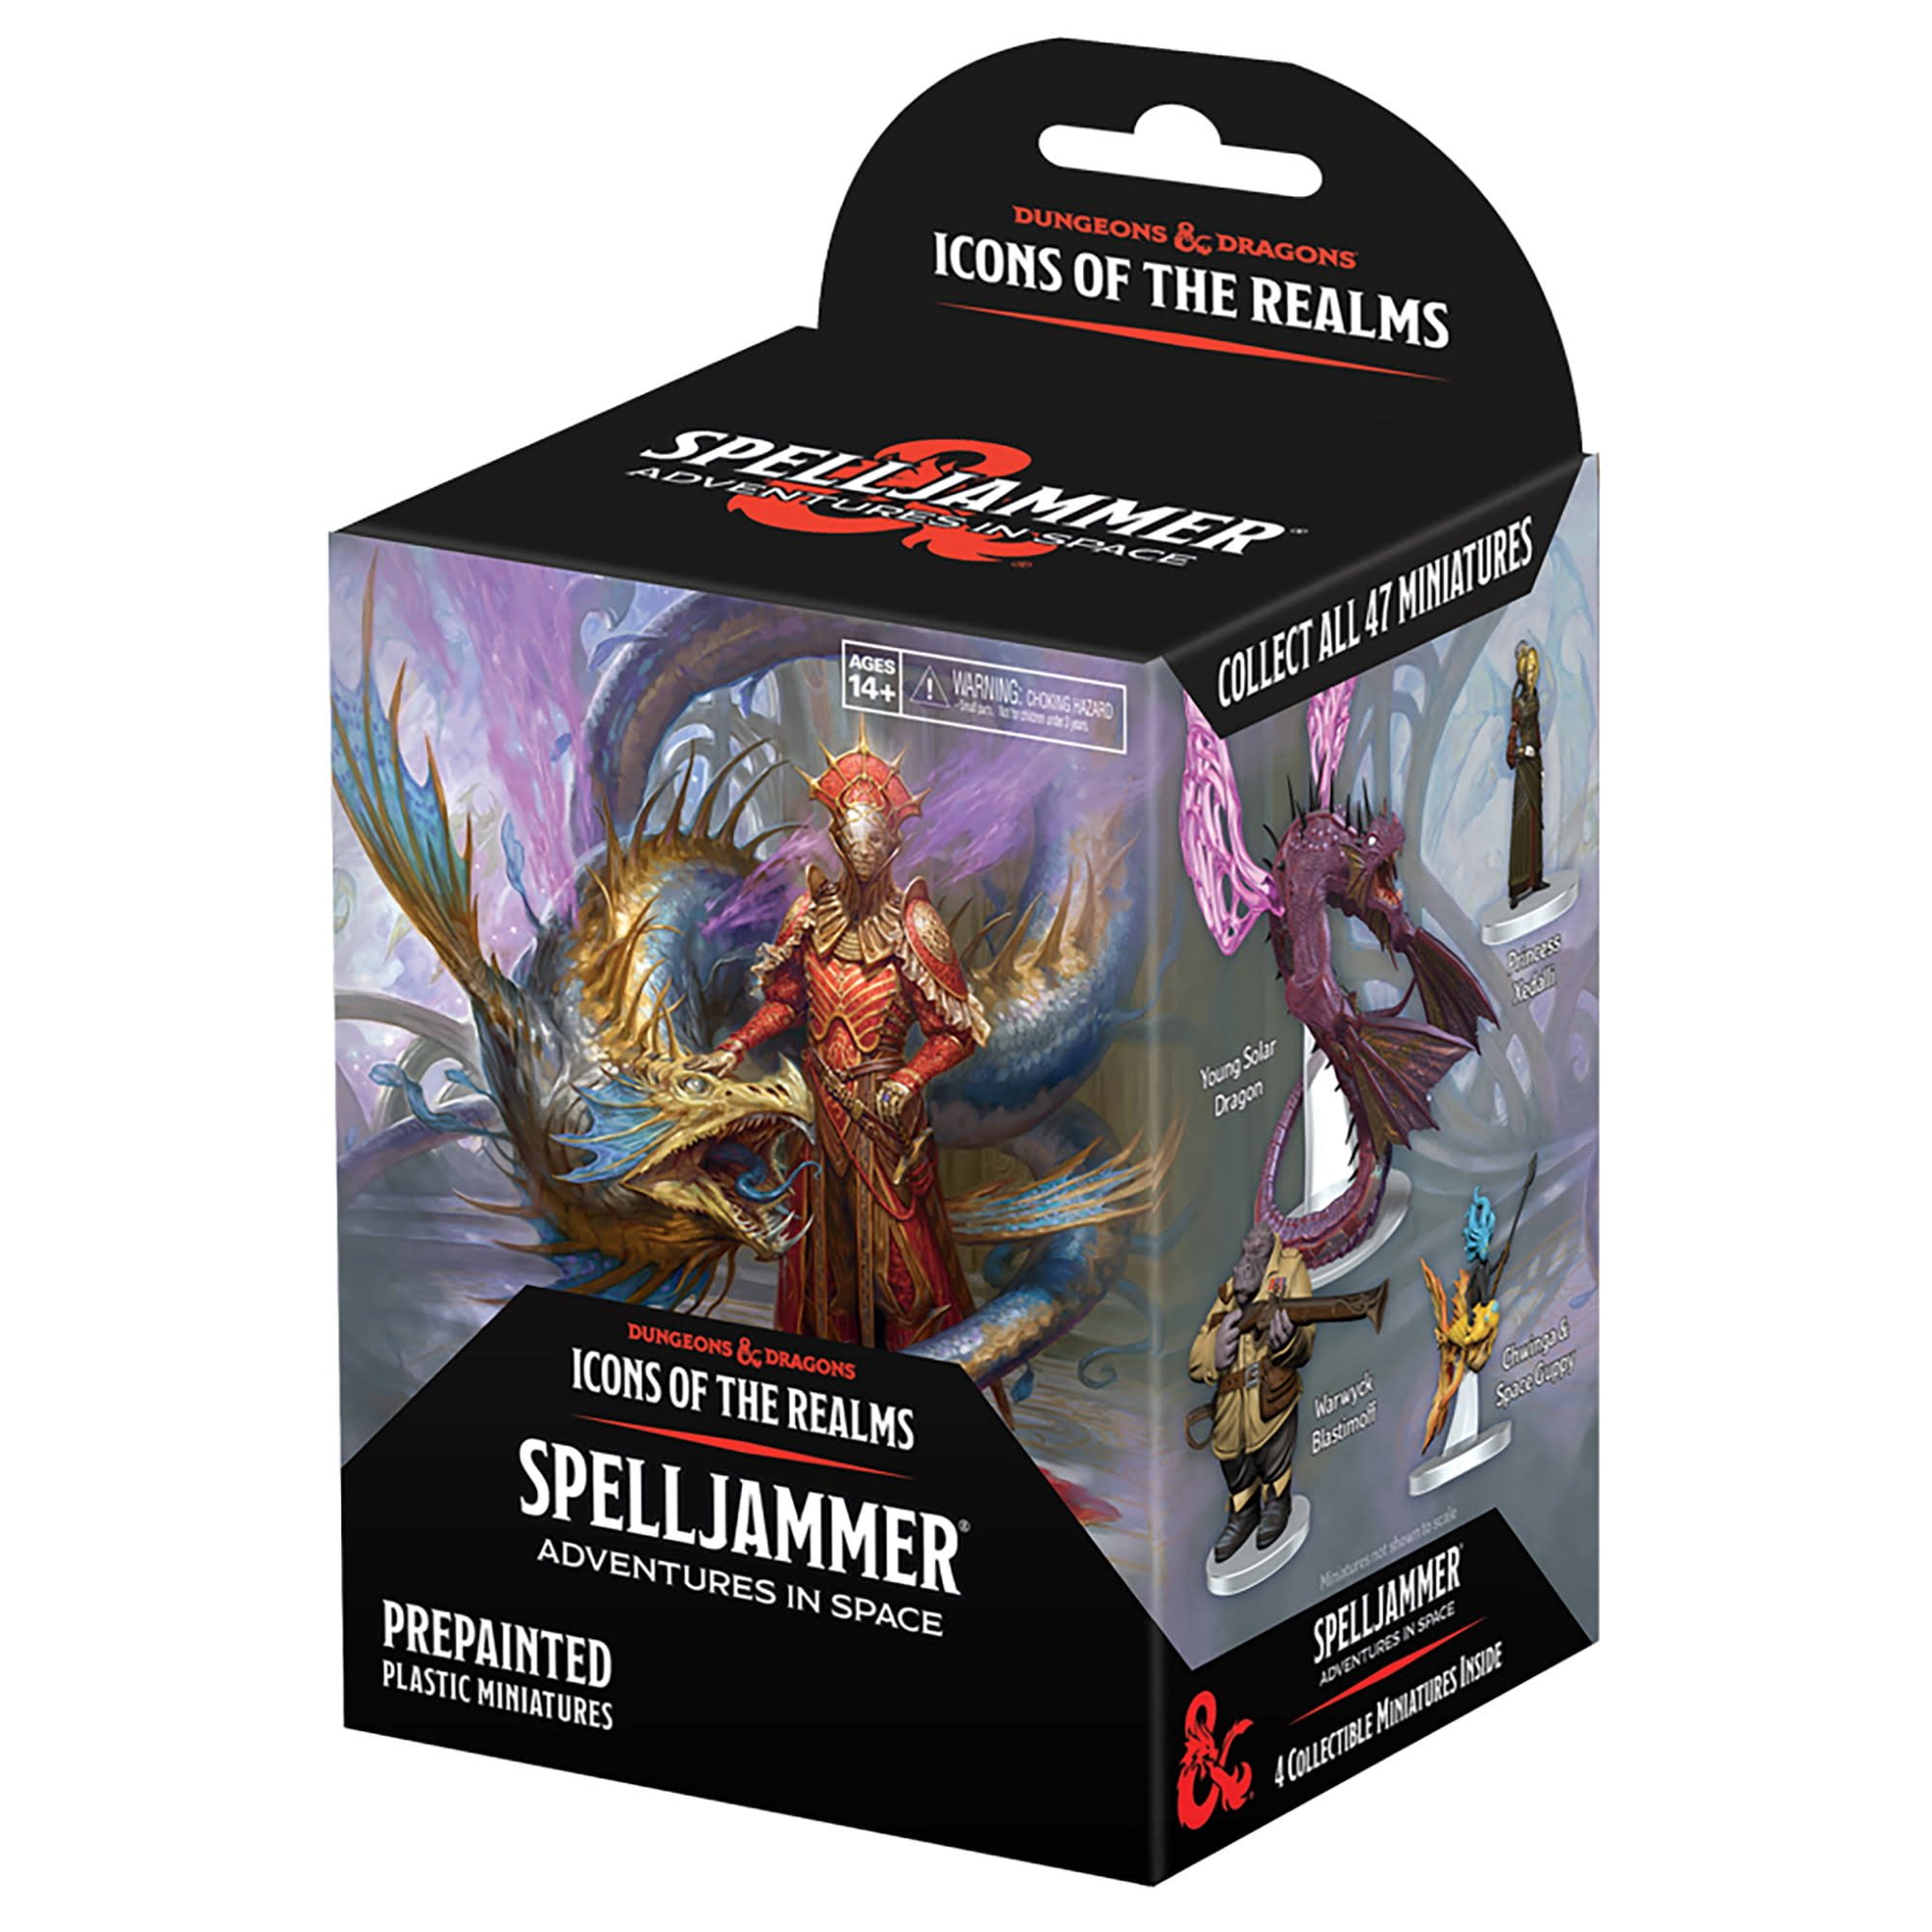 Spelljammer Adventures in Space Booster: D&D Icons of the Realms Miniatures